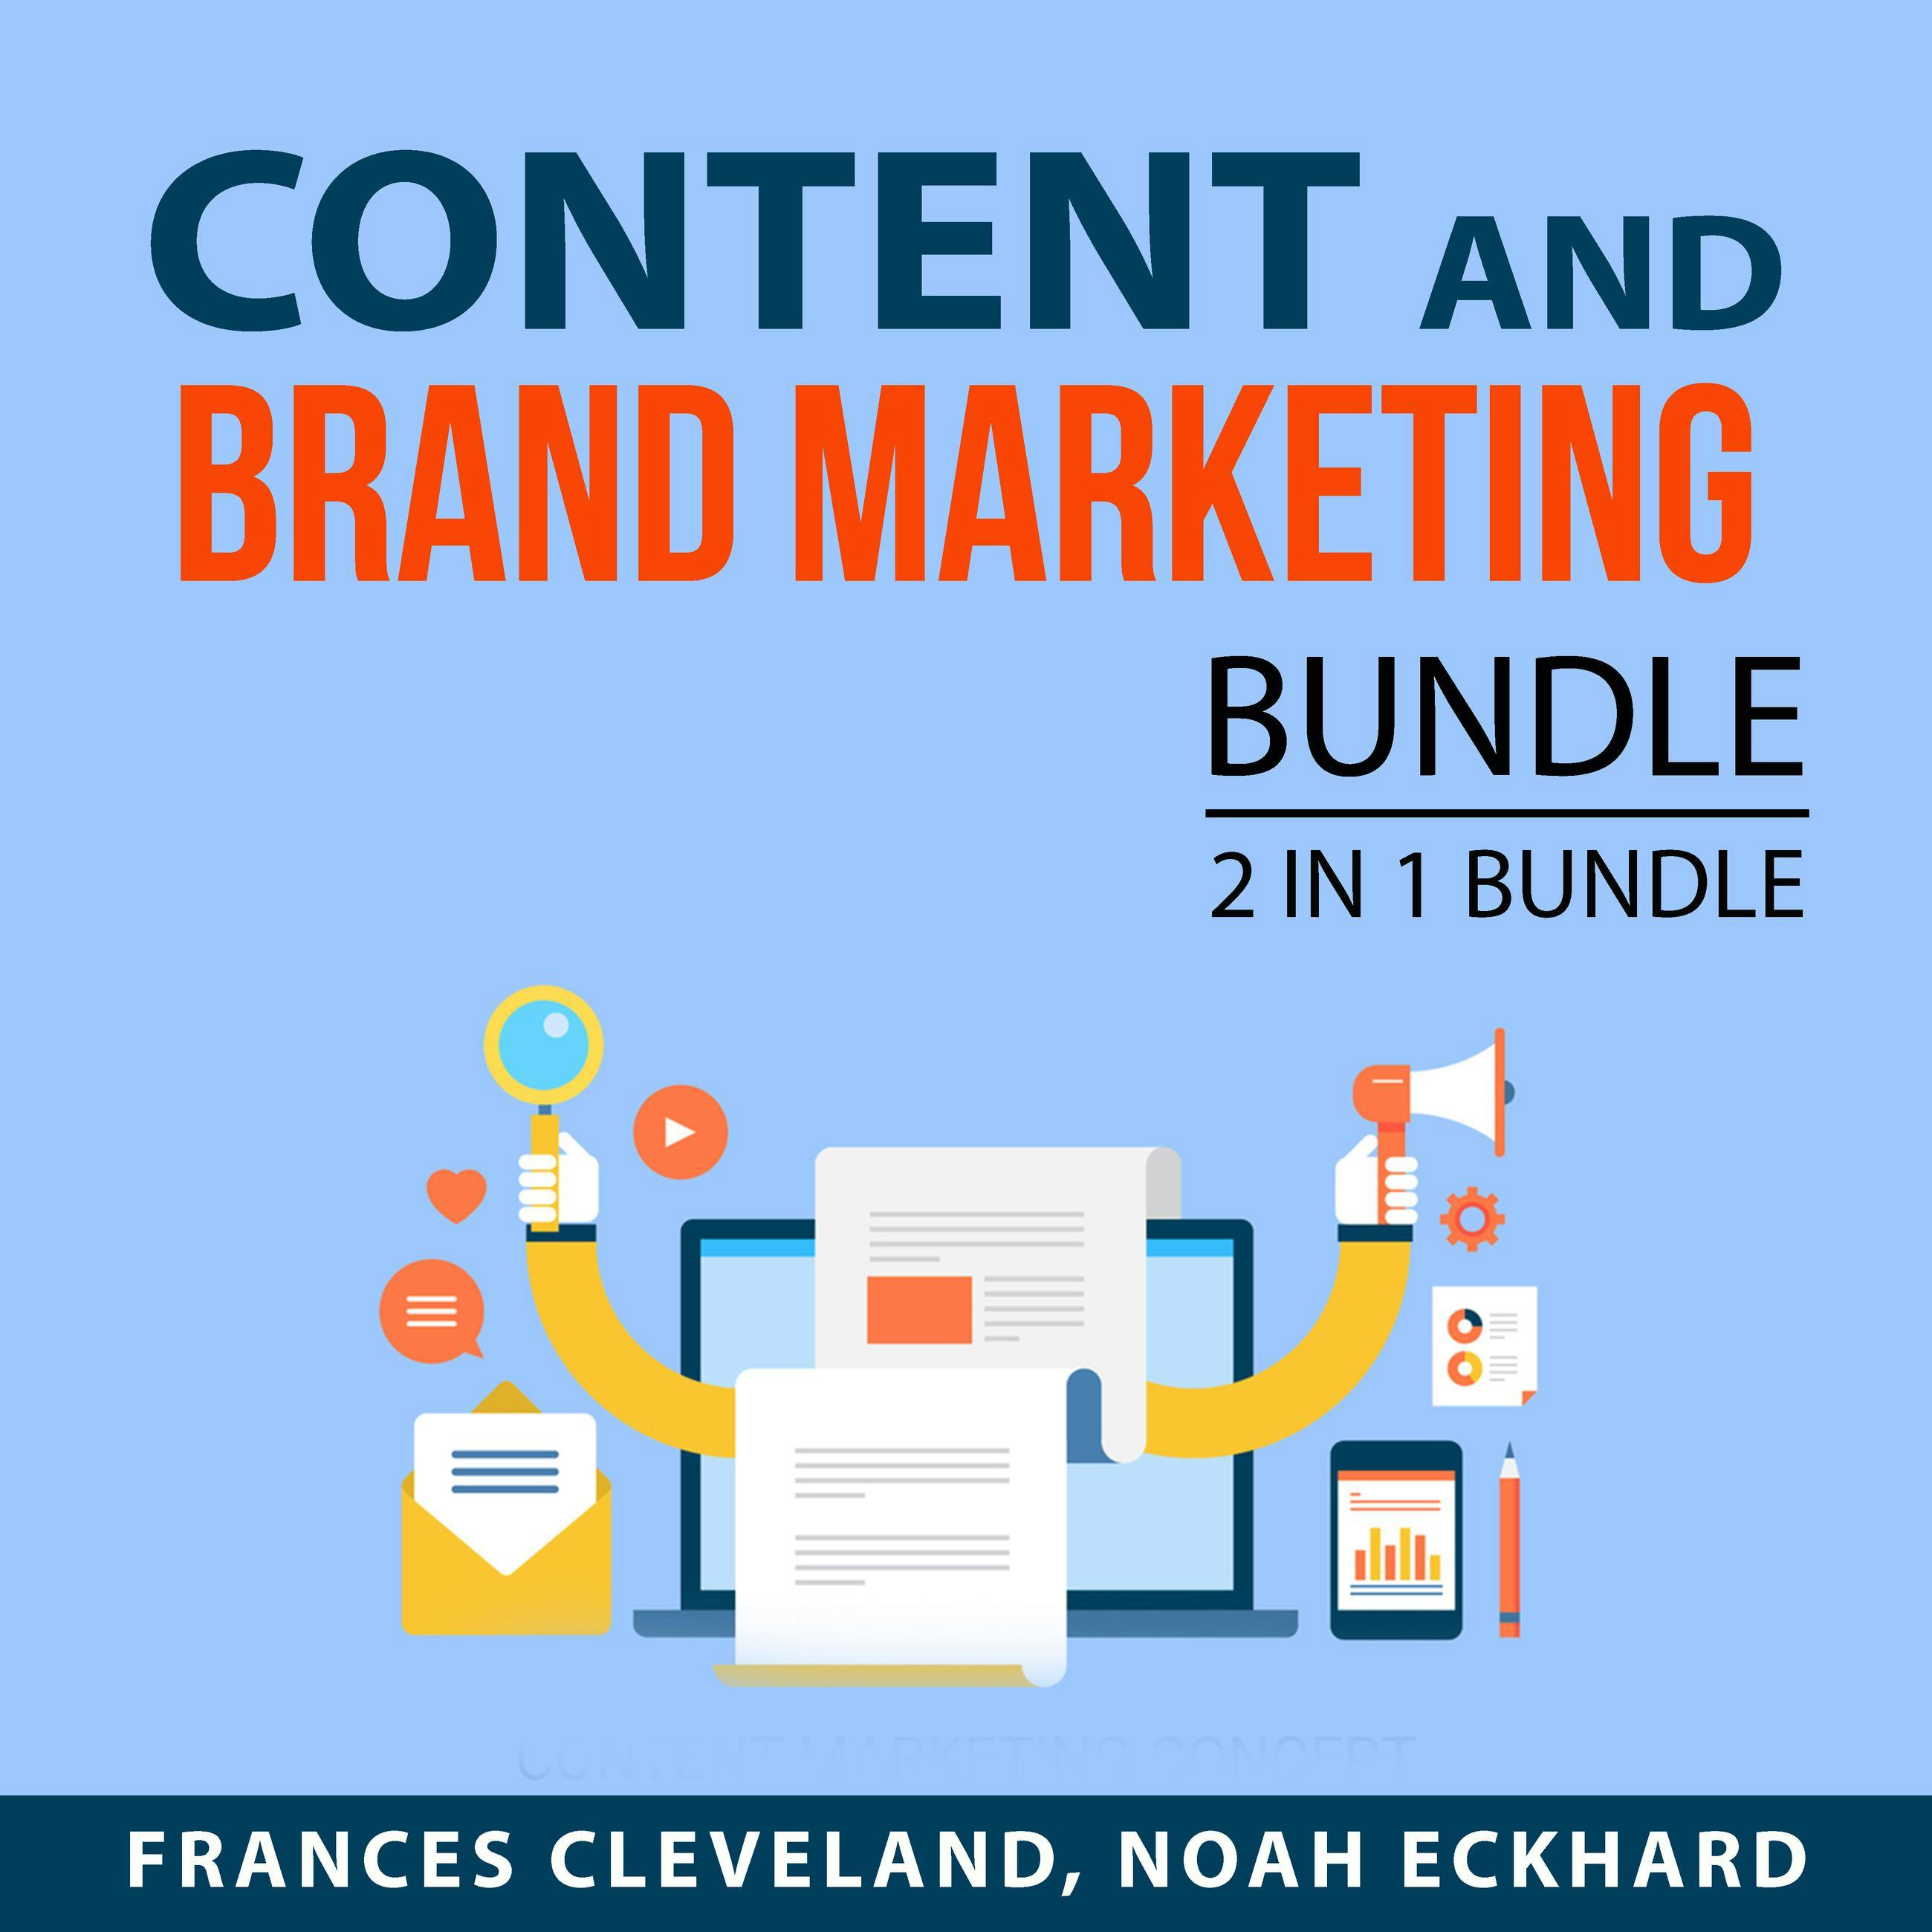 Content and Brand Marketing Bundle, 2 in 1 Bundle:: Content Marketing Made Easy and Expert Brand Marketing - undefined